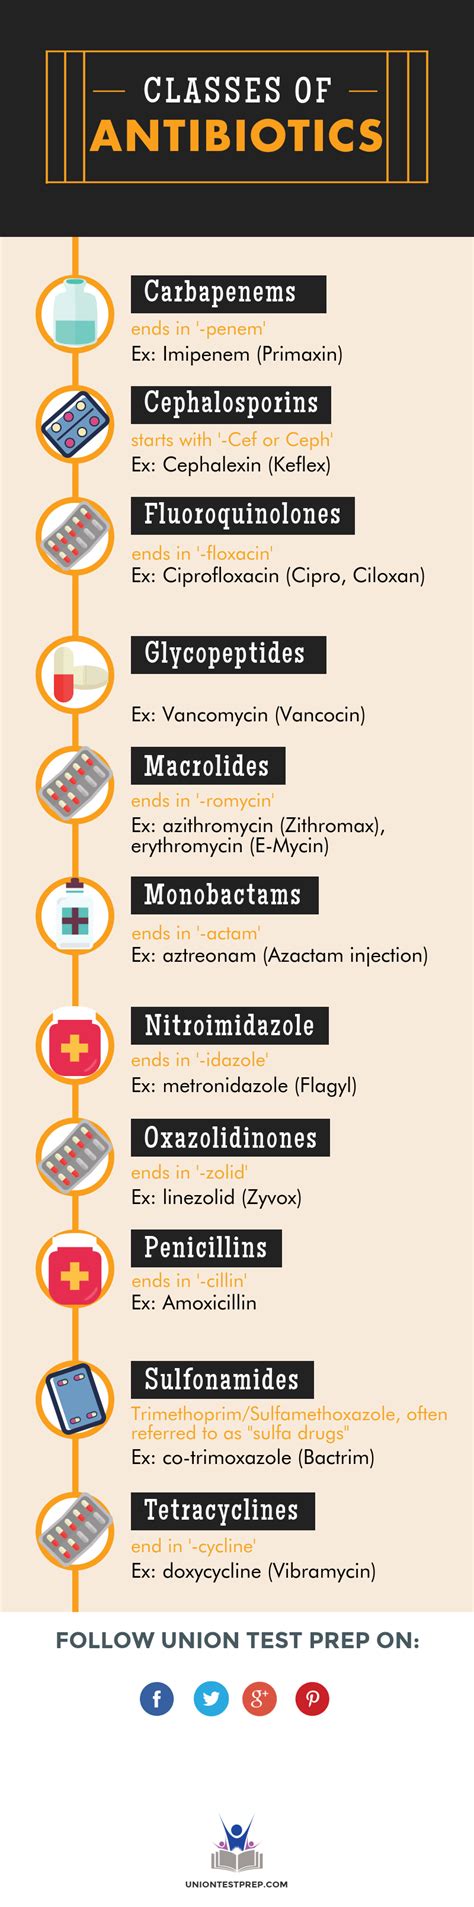 All About The Different Classes Of Antibiotics Great Information For